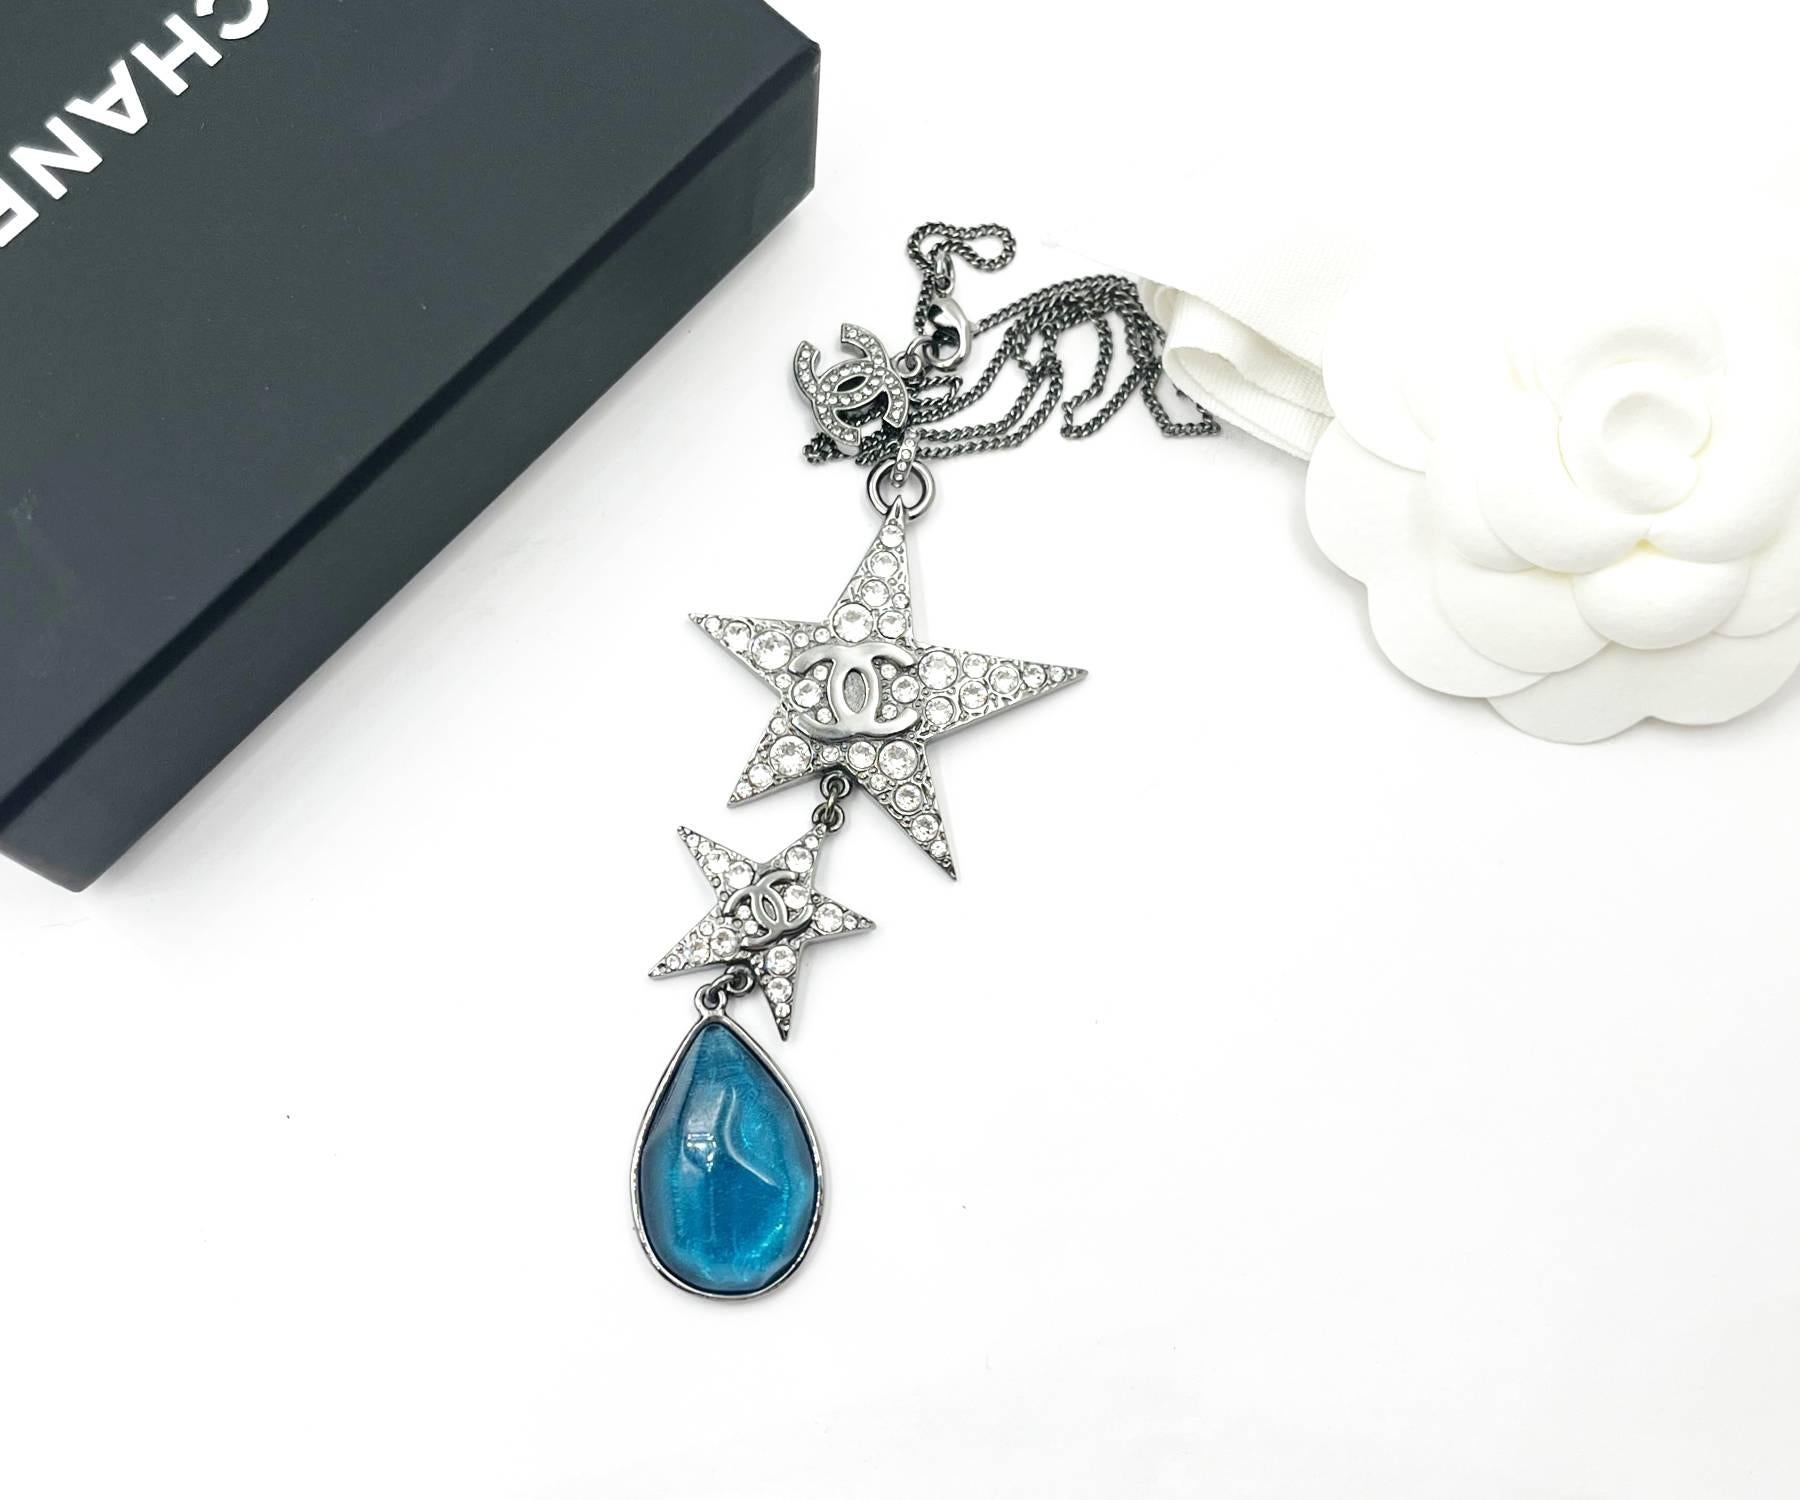 Chanel Brand New Gunmetal Star CC Blue Stone Tear Drop Large Pendant Choker Necklace

*Marked 22
*Made in Italy
*Comes with the original box, pouch, ribbon and camellia flower
*Brand New

-It is approximately 14″ long.
-The pendant is approximately